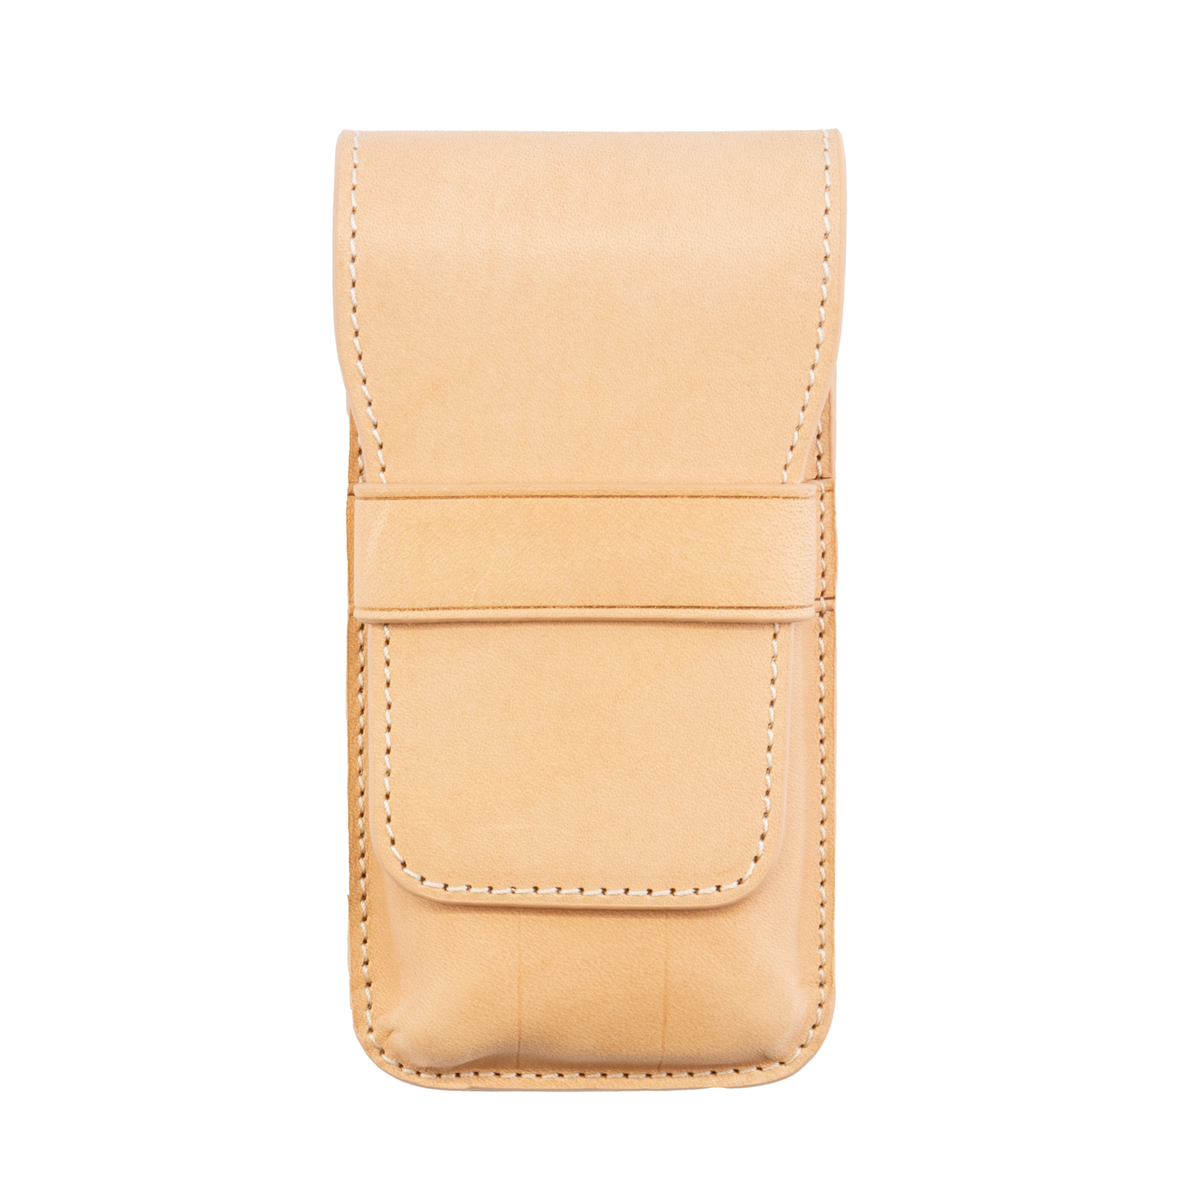 Galen Leather Co. Flap Pen Case for 3 Pens- Undyed Leather